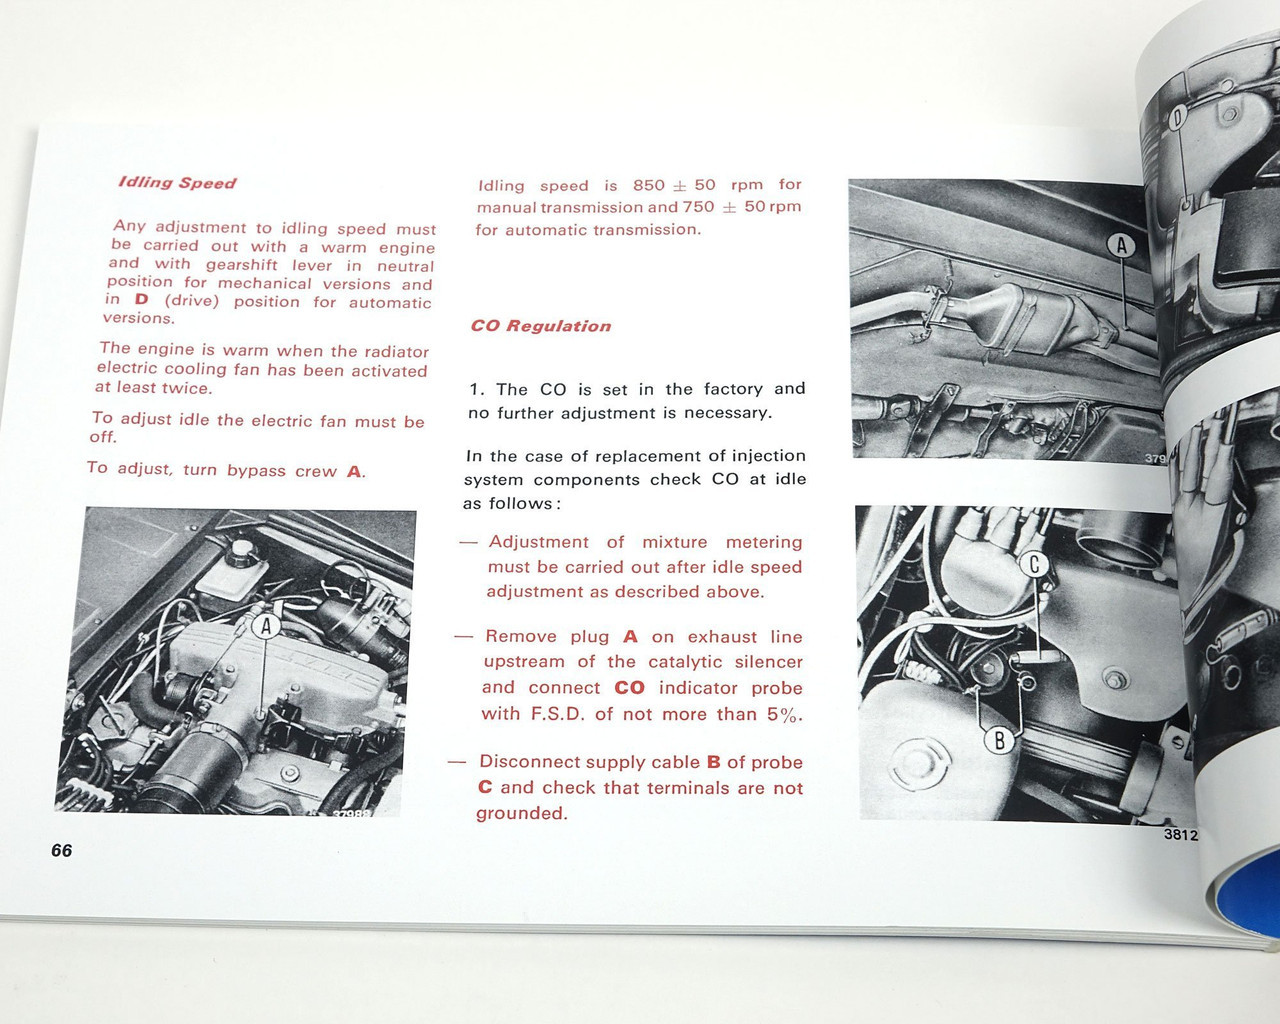 Faithful reproduction of the original owners manual 
FIAT Spider 2000 - 1980
- Auto Ricambi
RS0-014